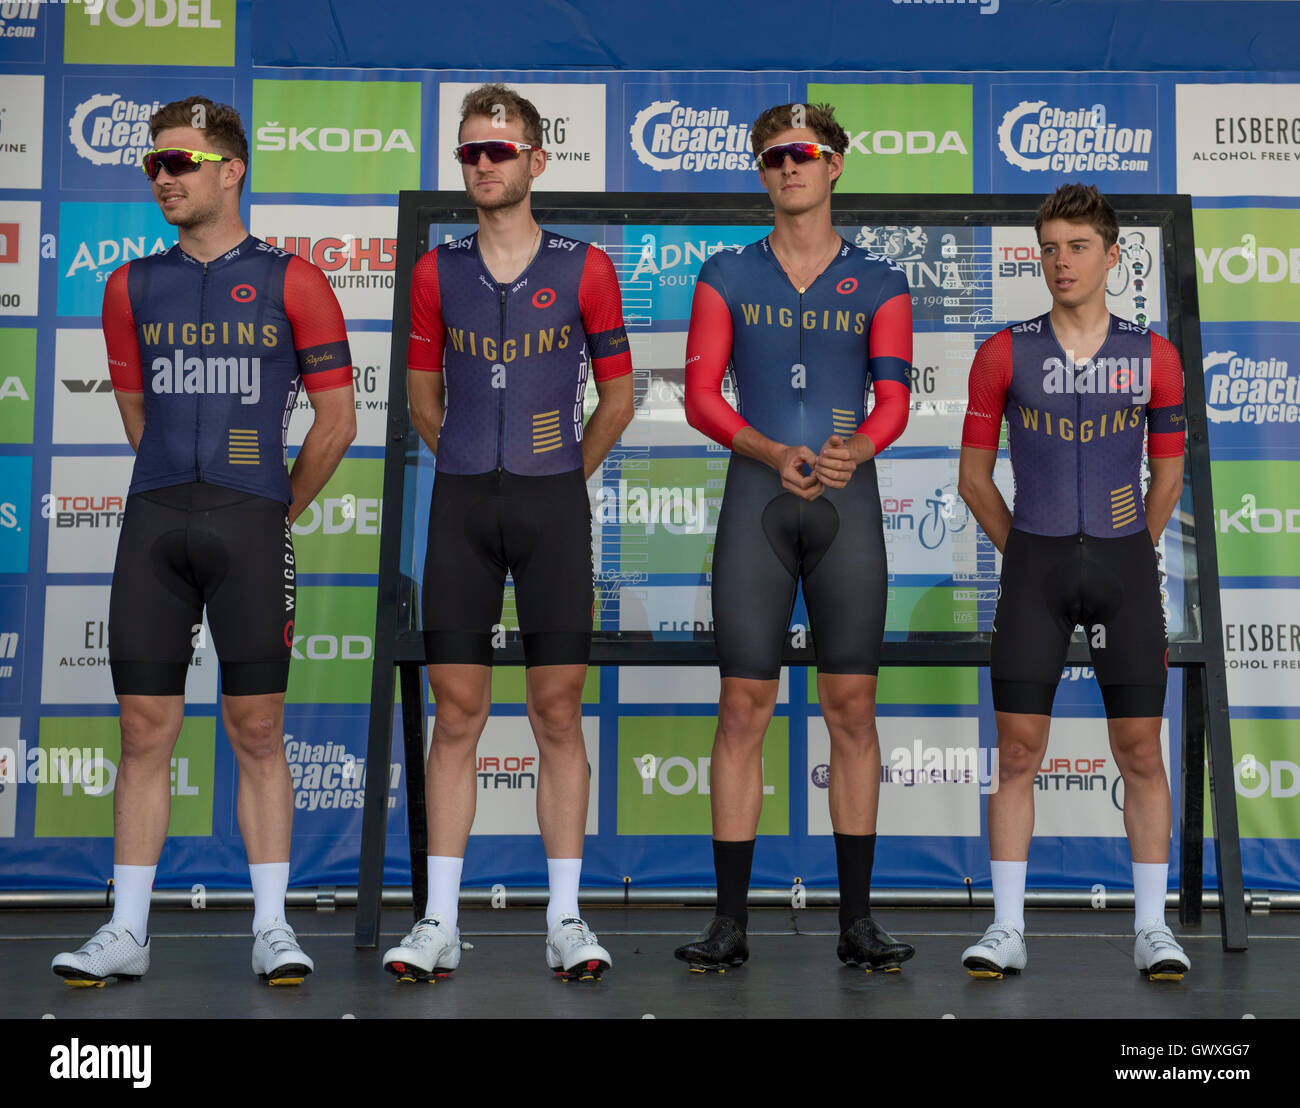 Tour of Britain stage 8 final in central London, 11 September 2016, Team Wiggins pre-race lineup Stock Photo